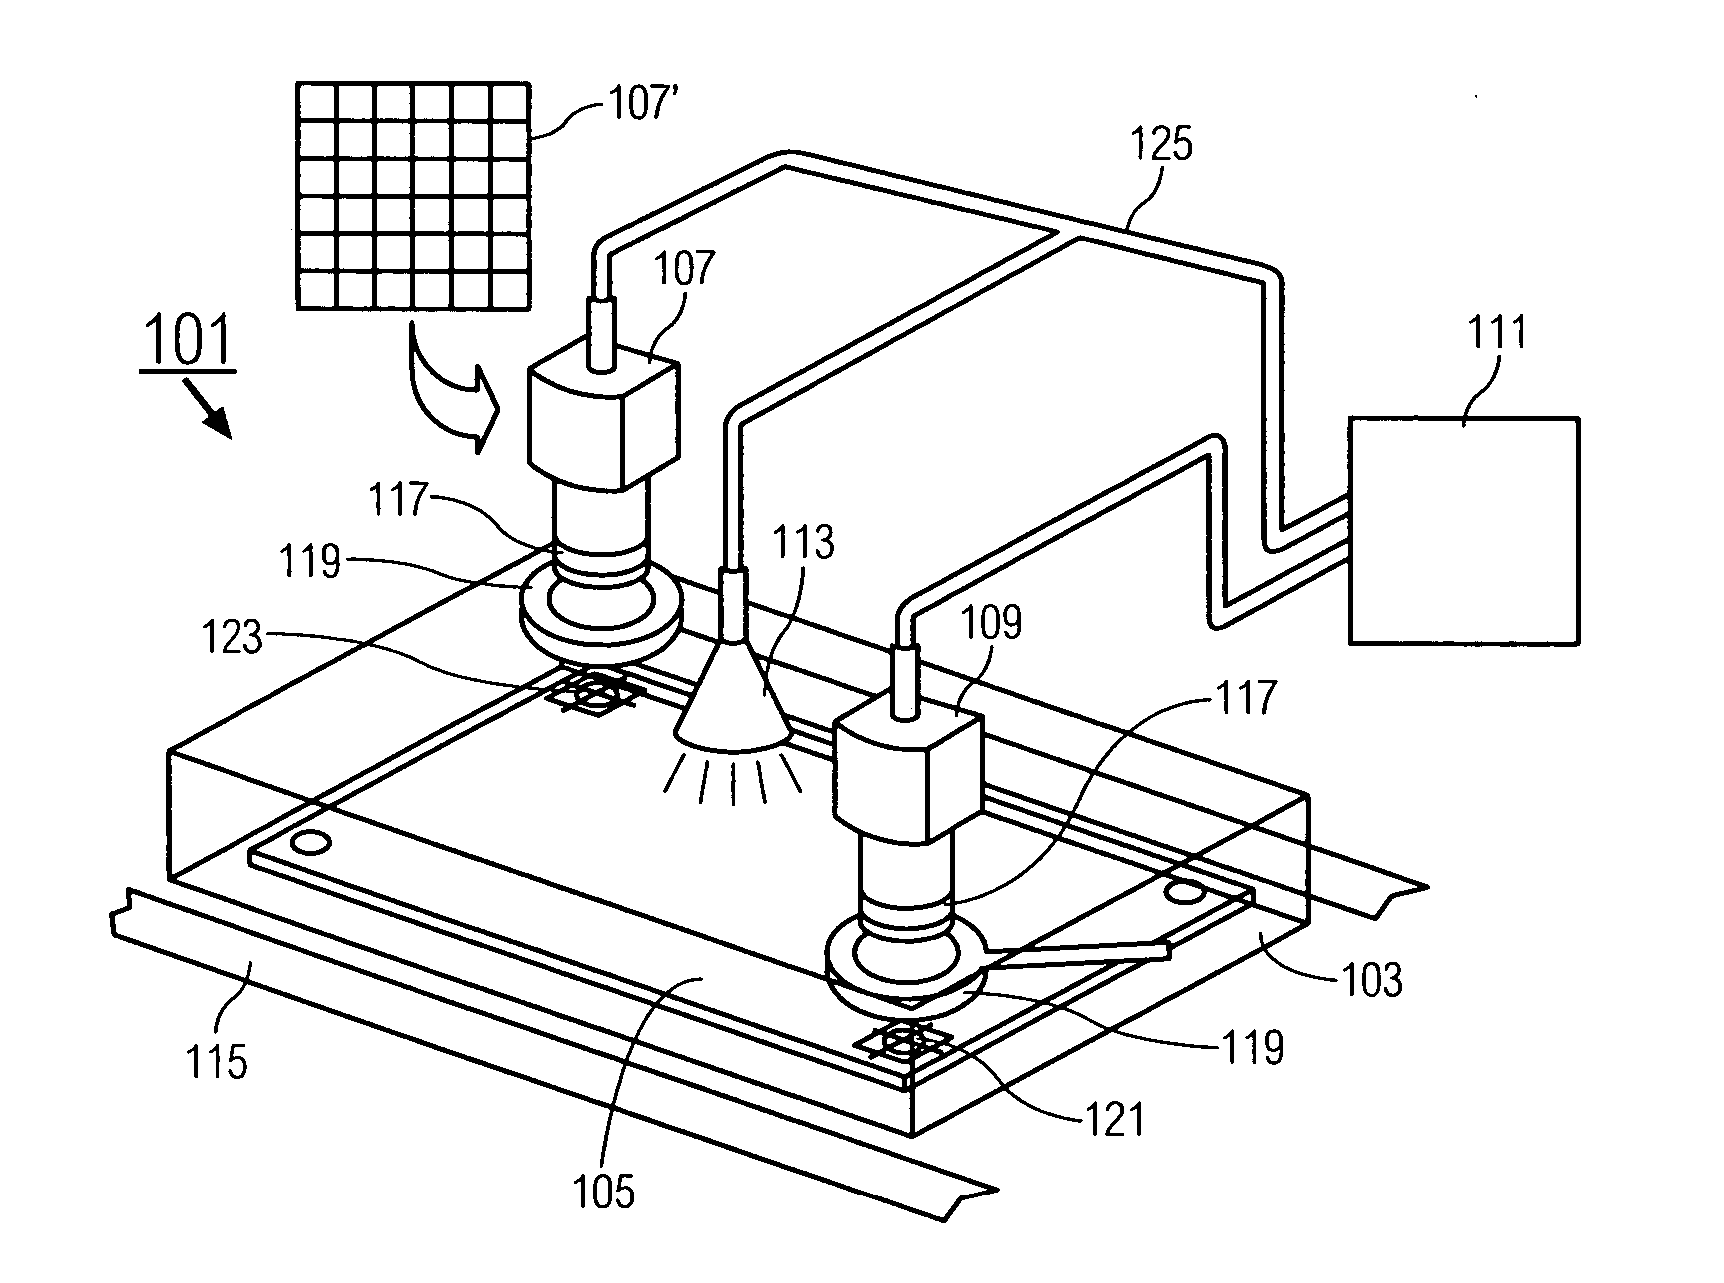 In-circuit test fixture with integral vision inspection system